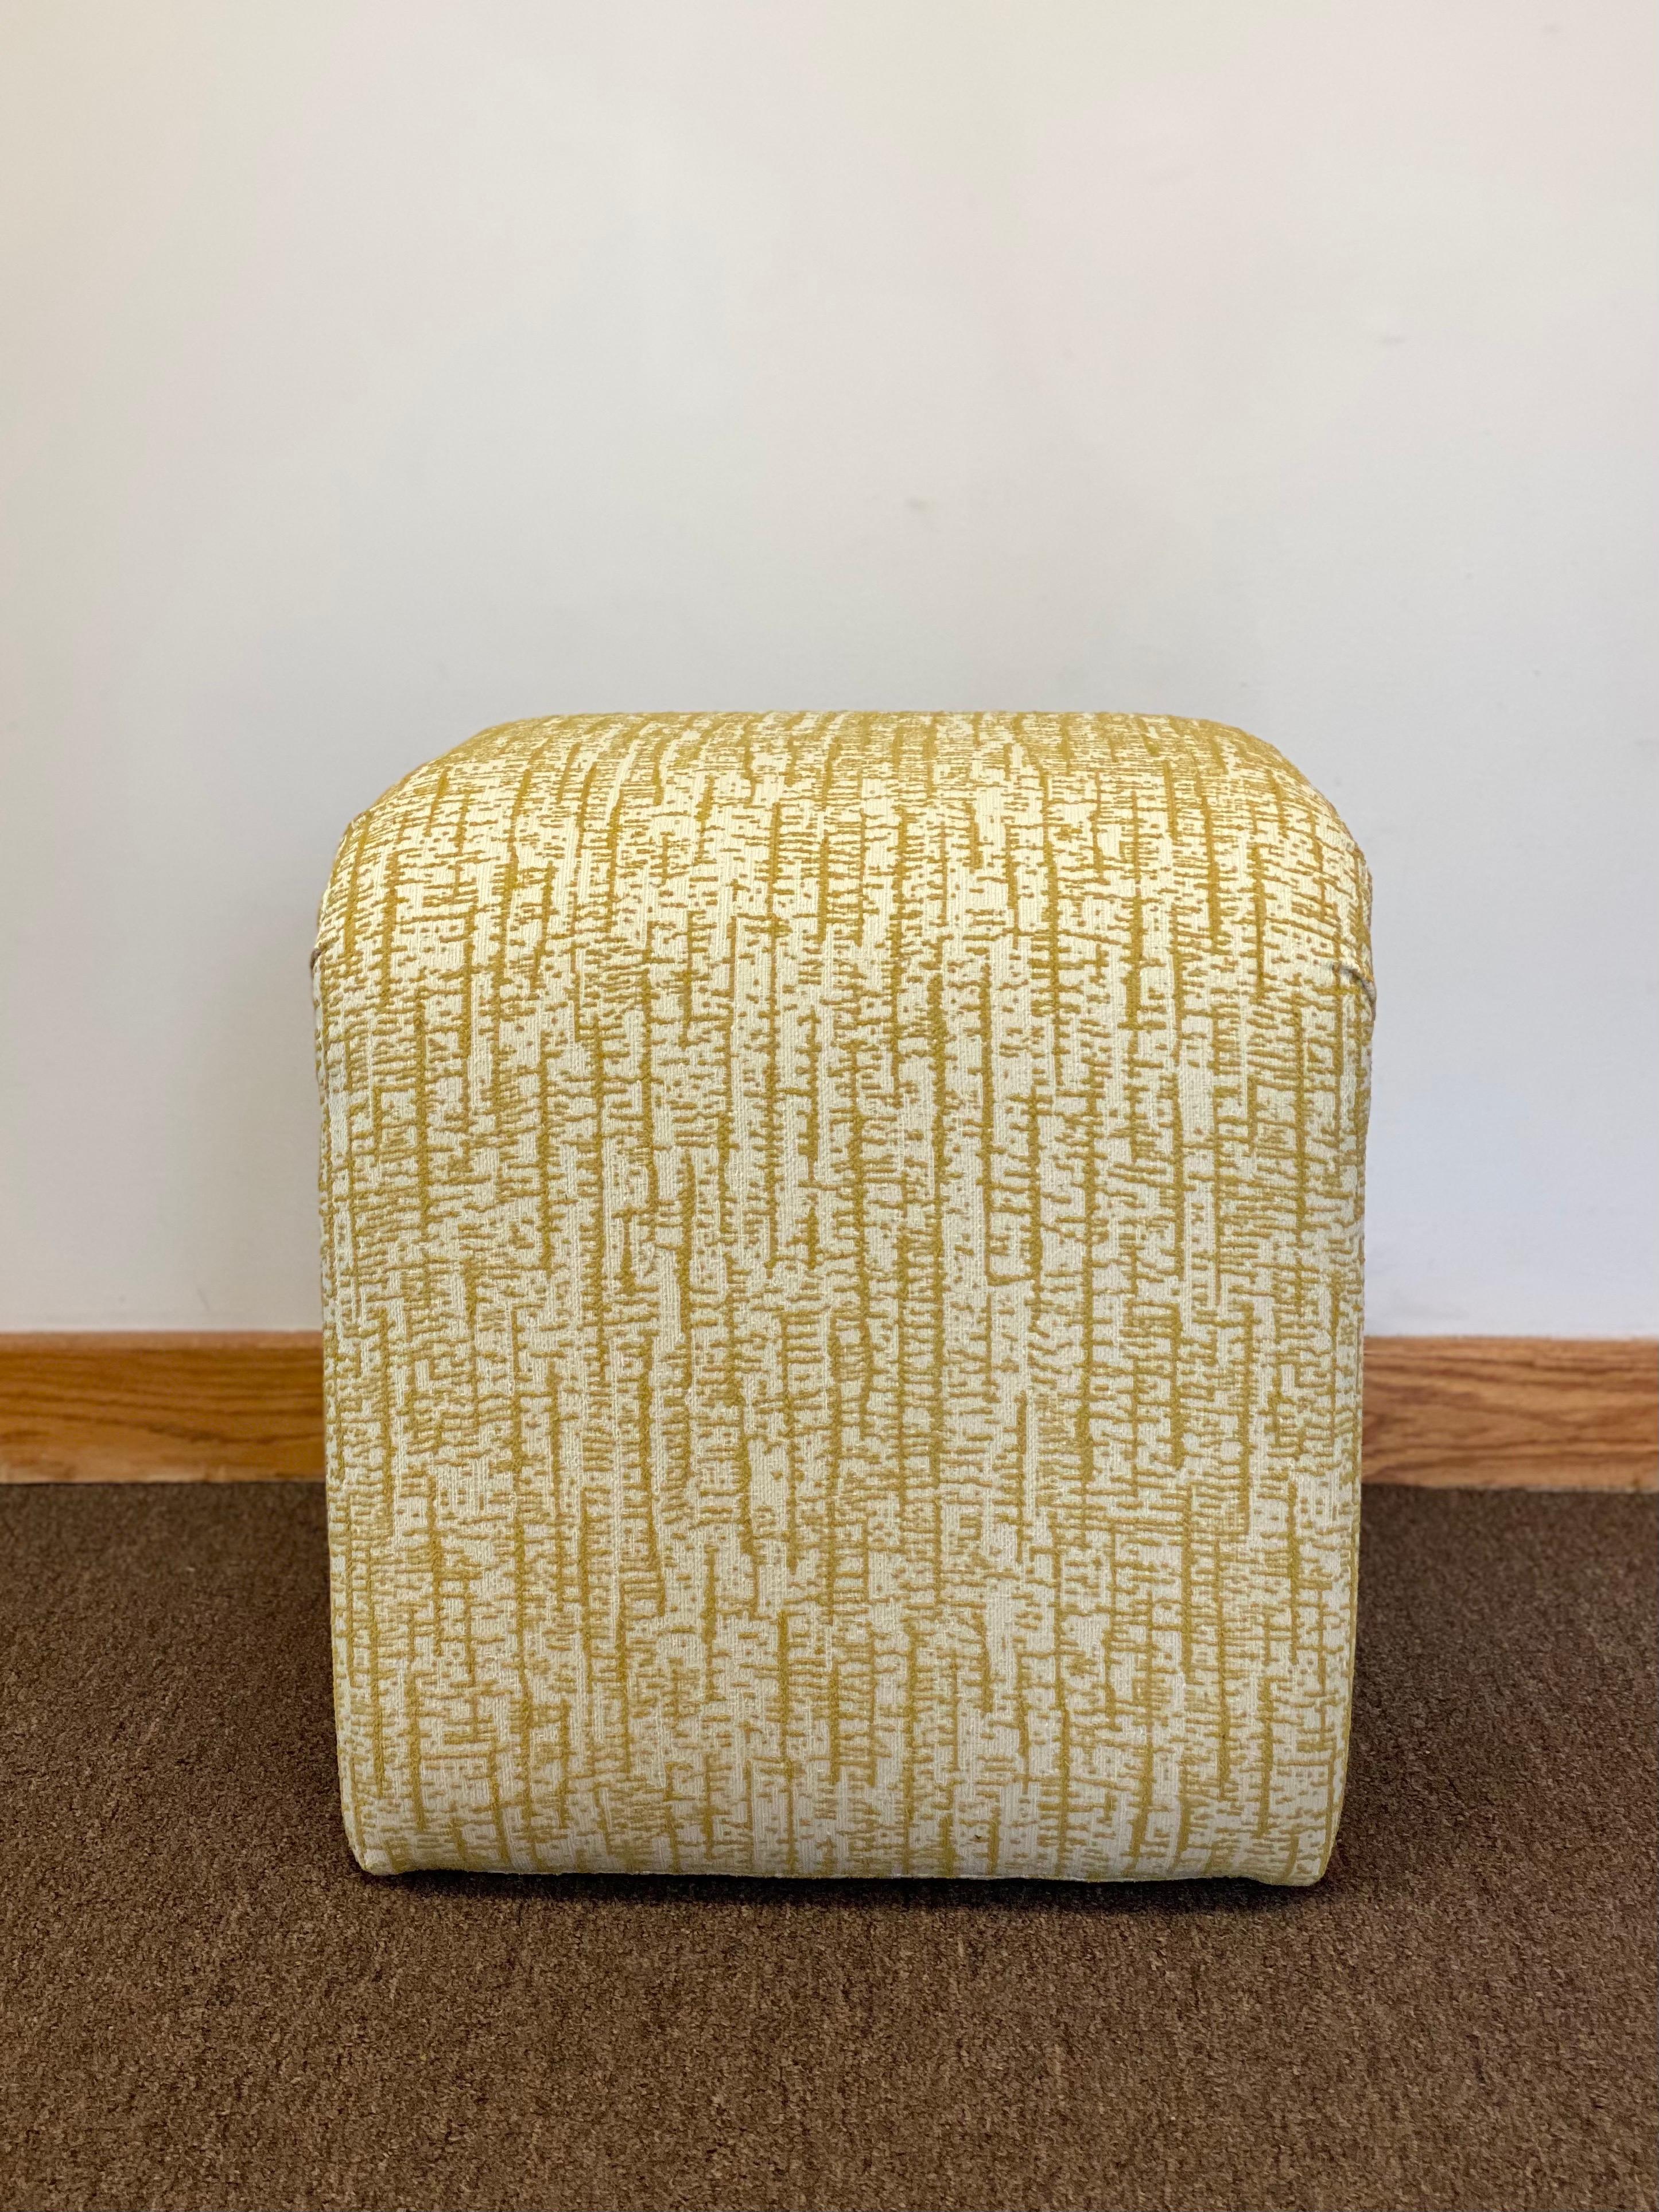 We are very pleased to offer a fabulous, Mid-Century Modern, upholstered bench in the manner of Karl Springer. This piece is structurally sound and has been reupholstered in a new yellow mustard and white modern fabric. In excellent condition,